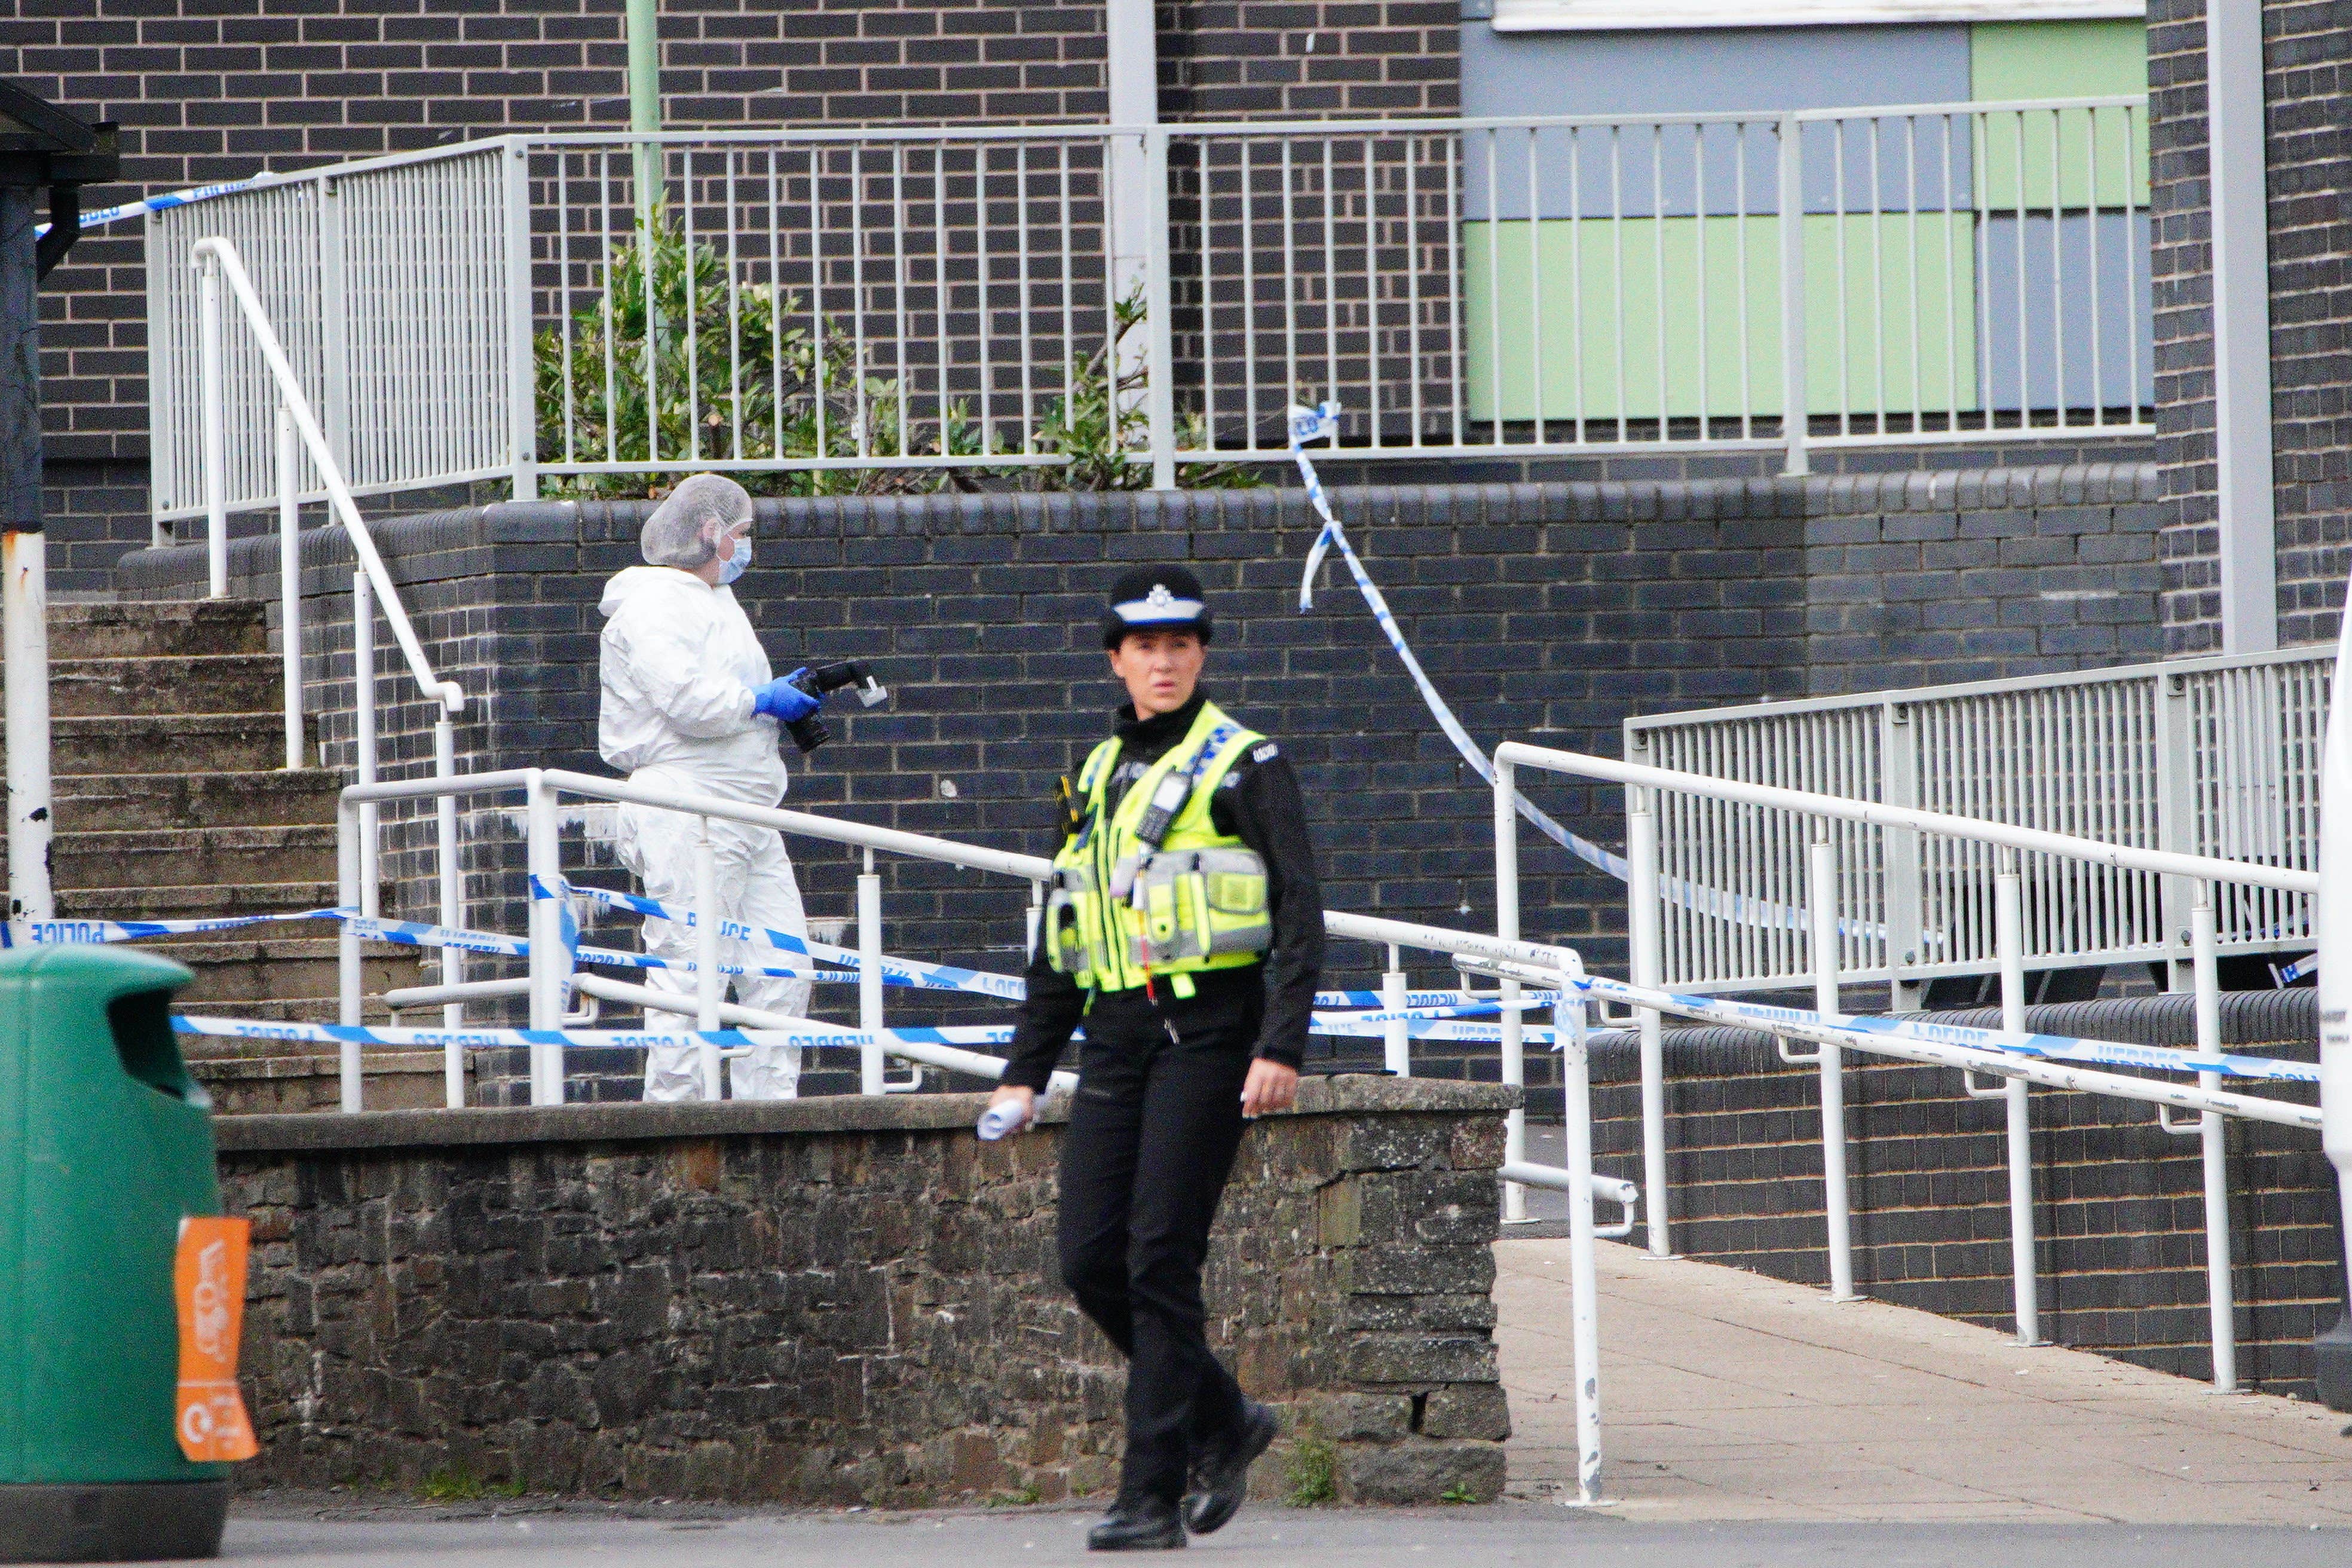 Police at the scene of the Amman Valley School stabbing